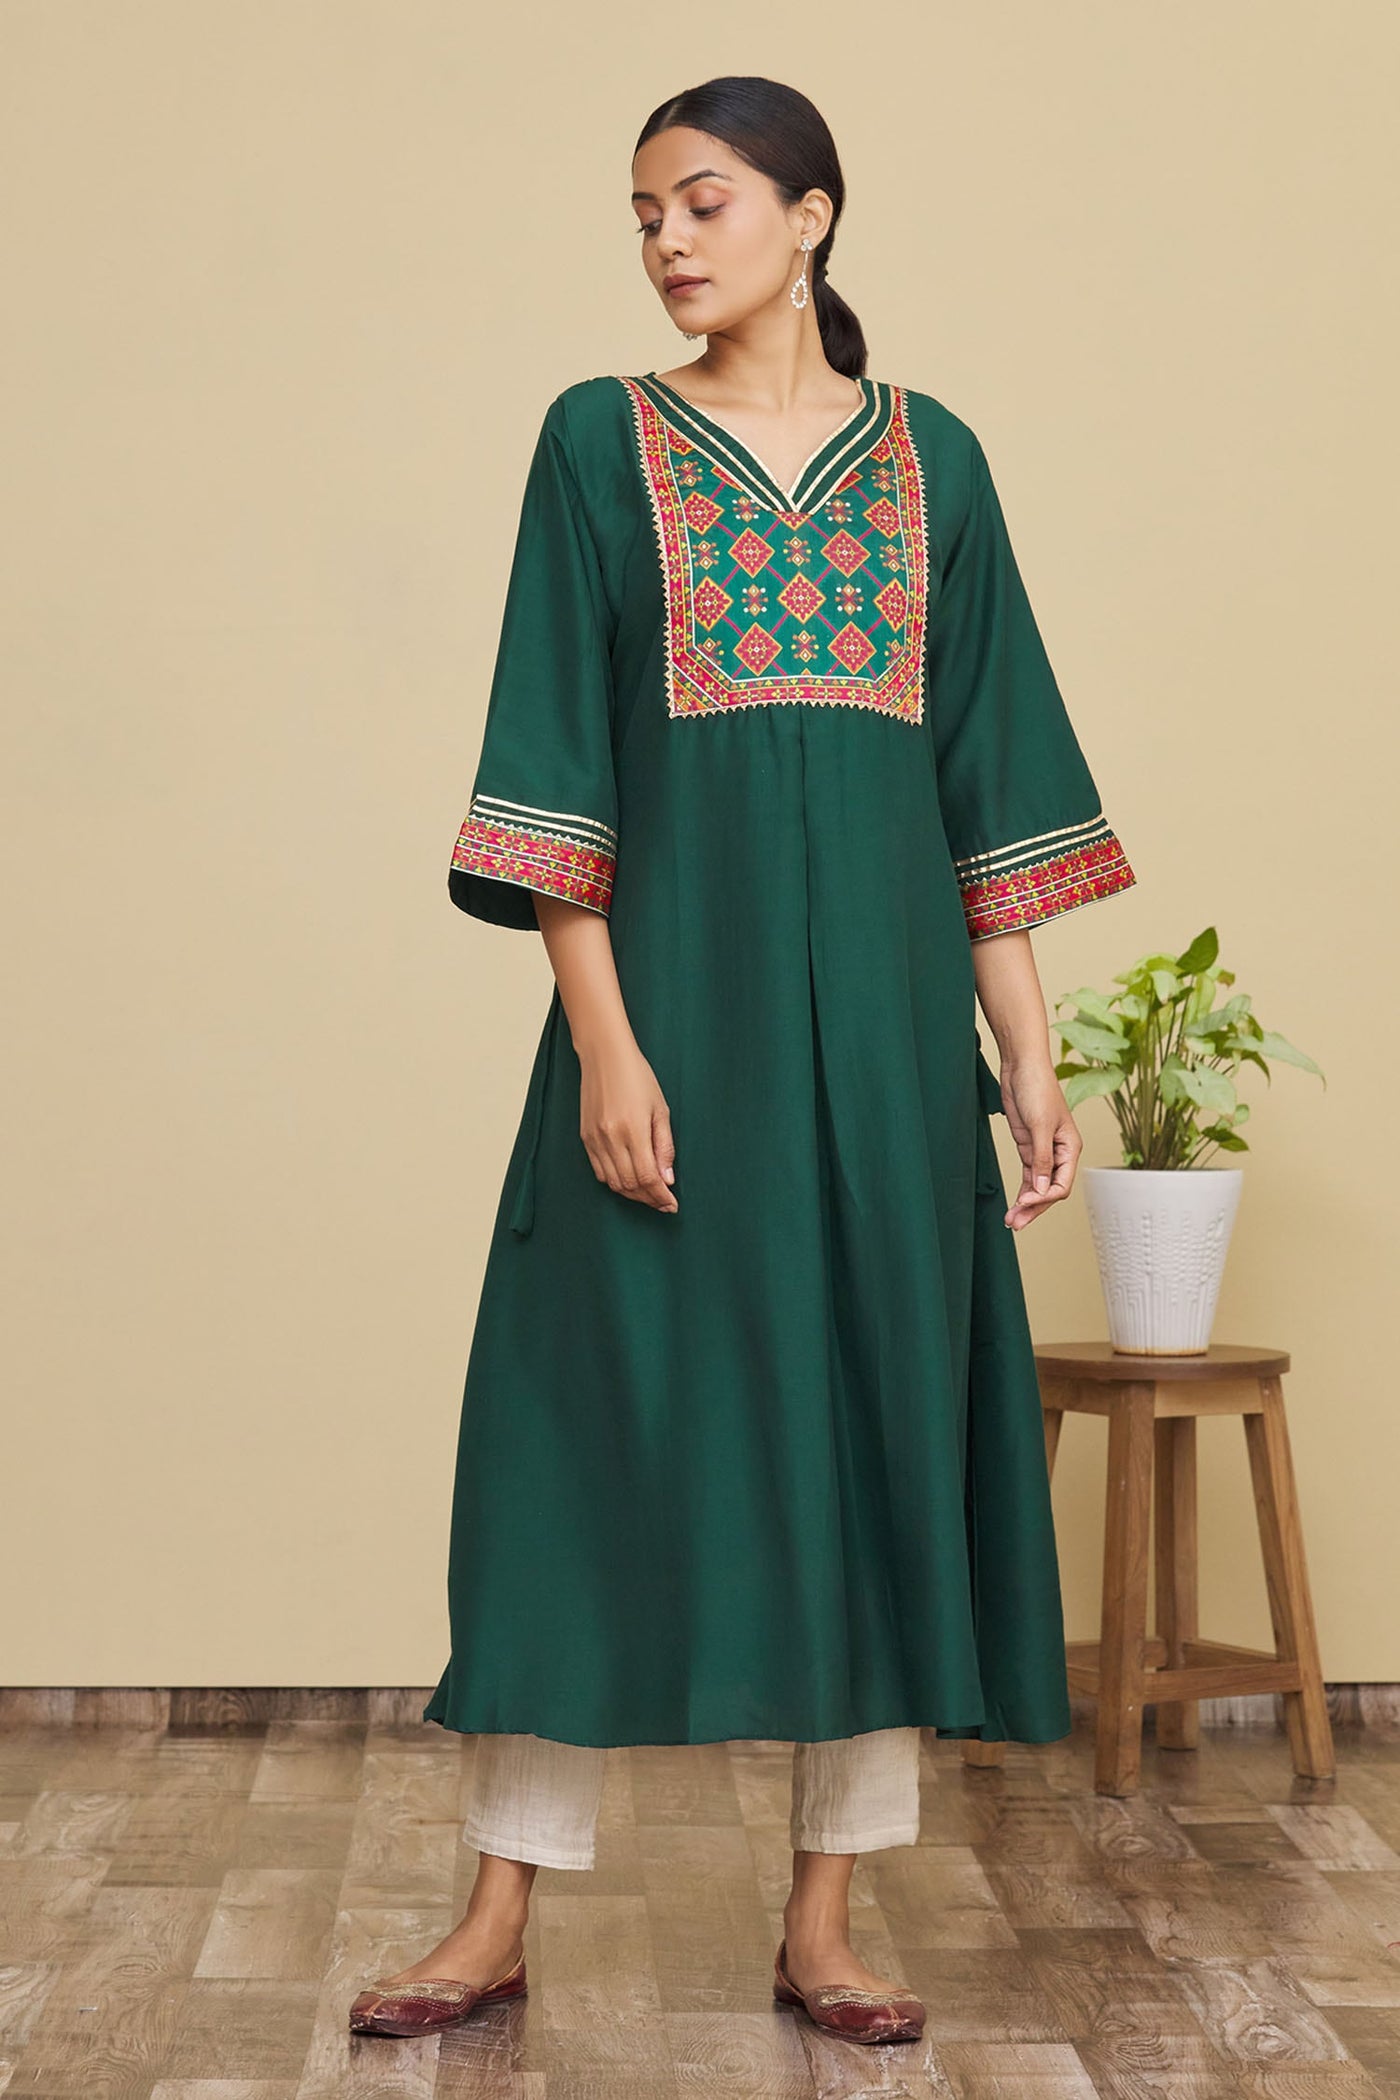 Green Geometric Print Kurta - Indian Clothing in Denver, CO, Aurora, CO, Boulder, CO, Fort Collins, CO, Colorado Springs, CO, Parker, CO, Highlands Ranch, CO, Cherry Creek, CO, Centennial, CO, and Longmont, CO. Nationwide shipping USA - India Fashion X